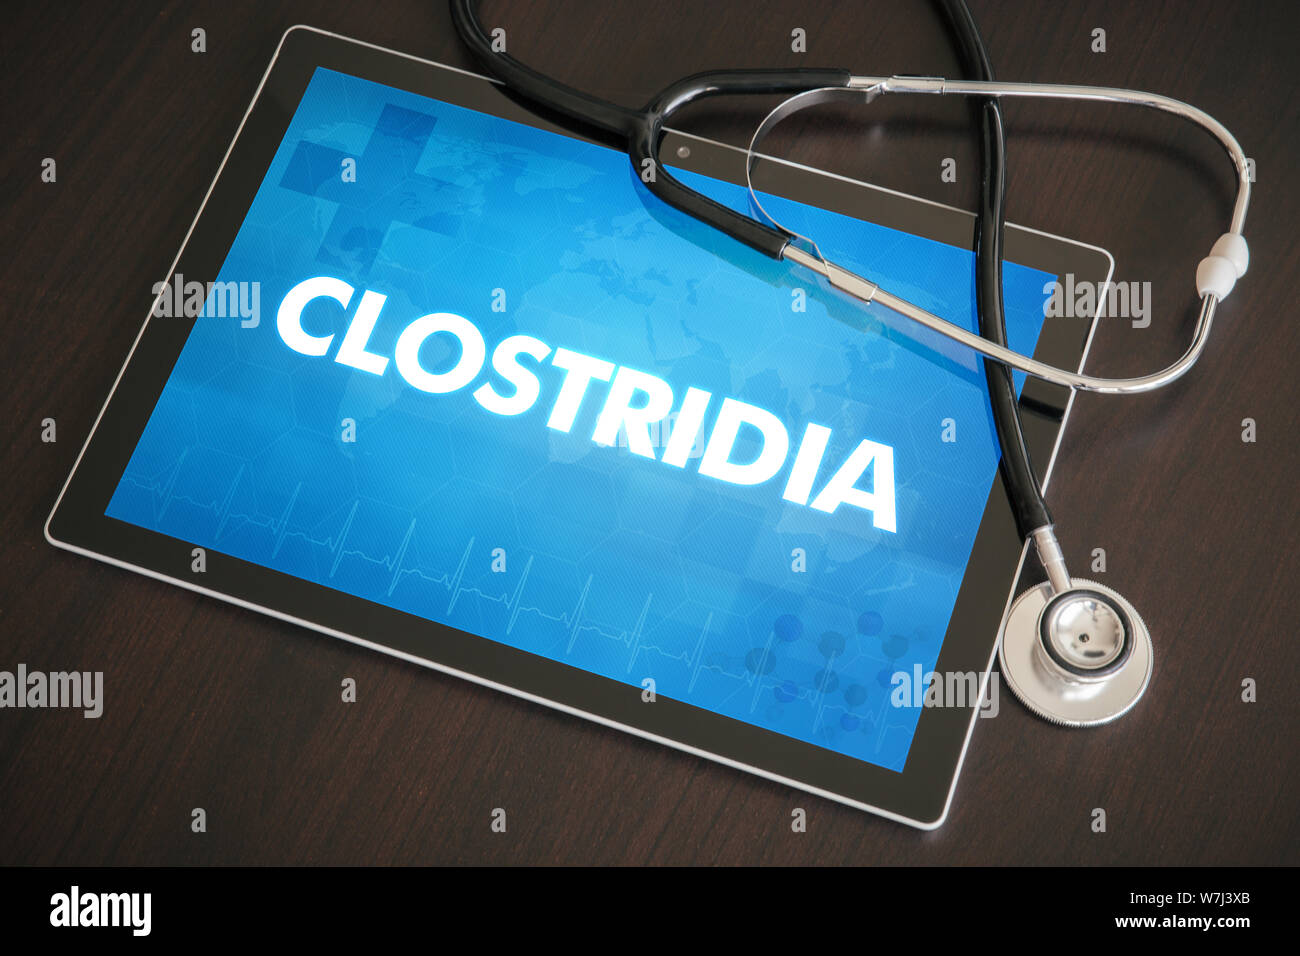 Clostridia (gastrointestinal disease) diagnosis medical concept on tablet screen with stethoscope. Stock Photo